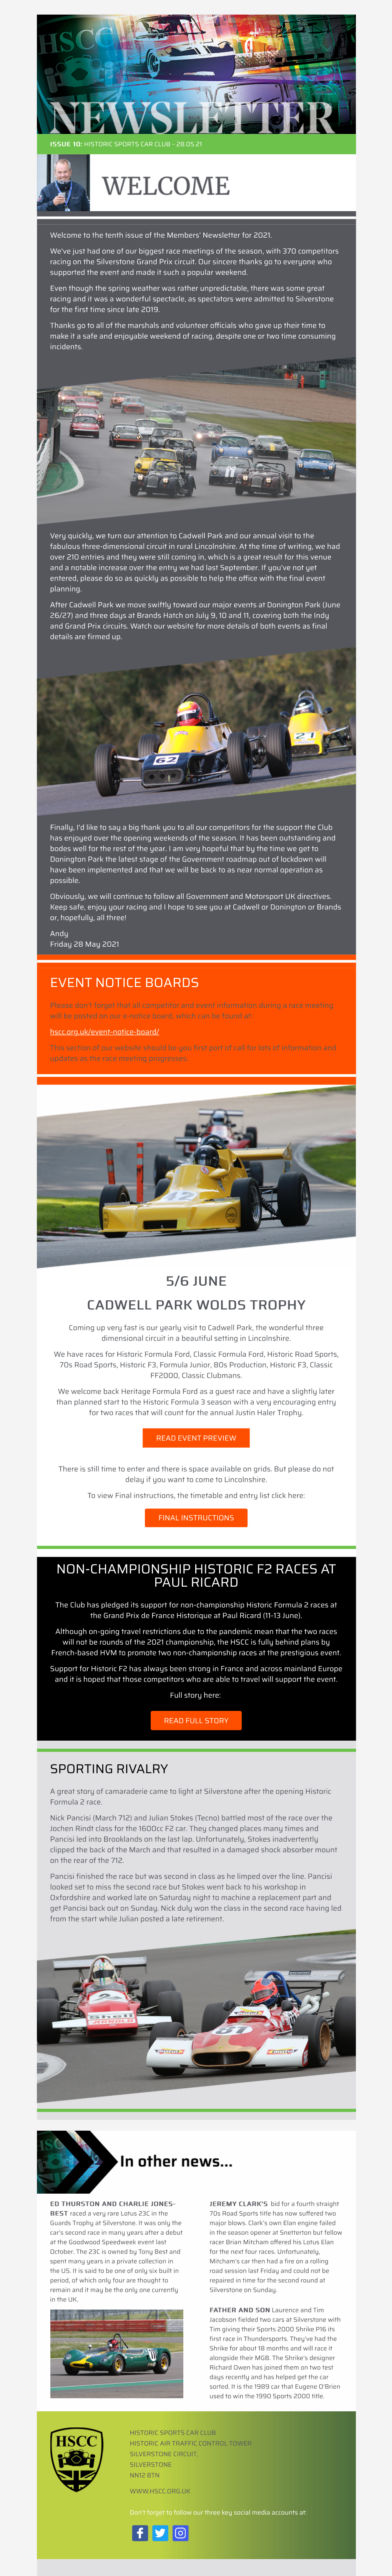 Event Notice Boards 5/6 June Cadwell Park Wolds Trophy